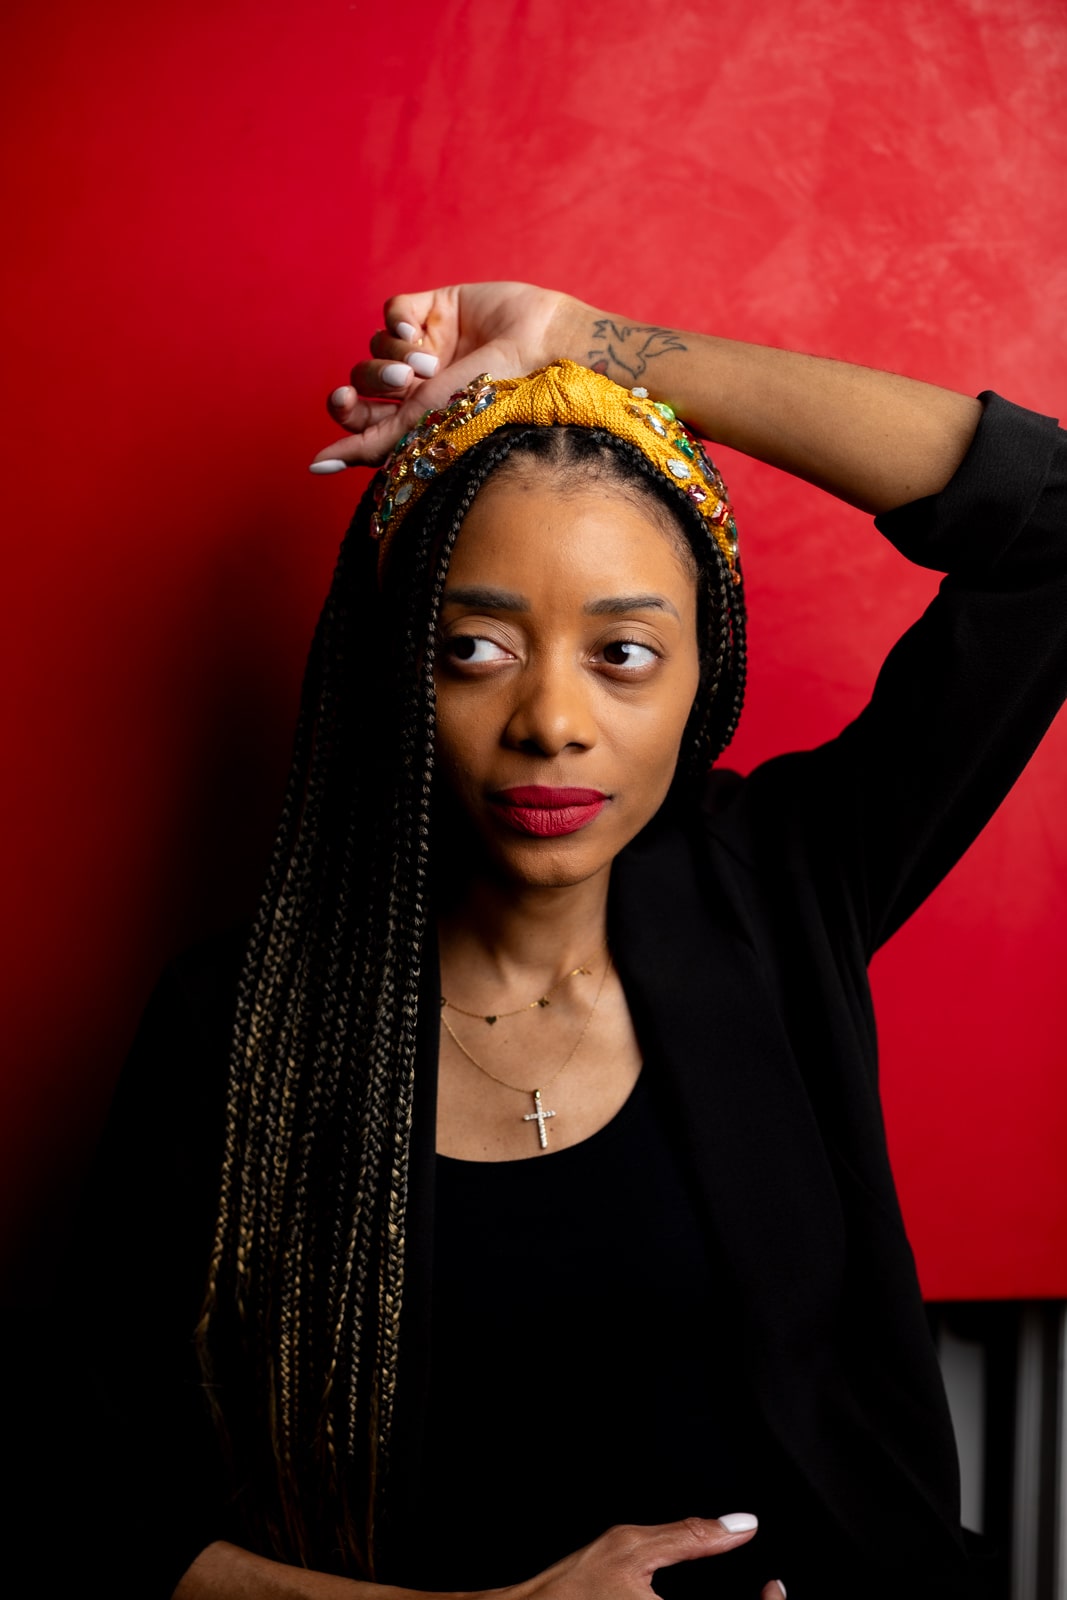 Shanika in a black shirt and blazer with a red background and one hand above her head.